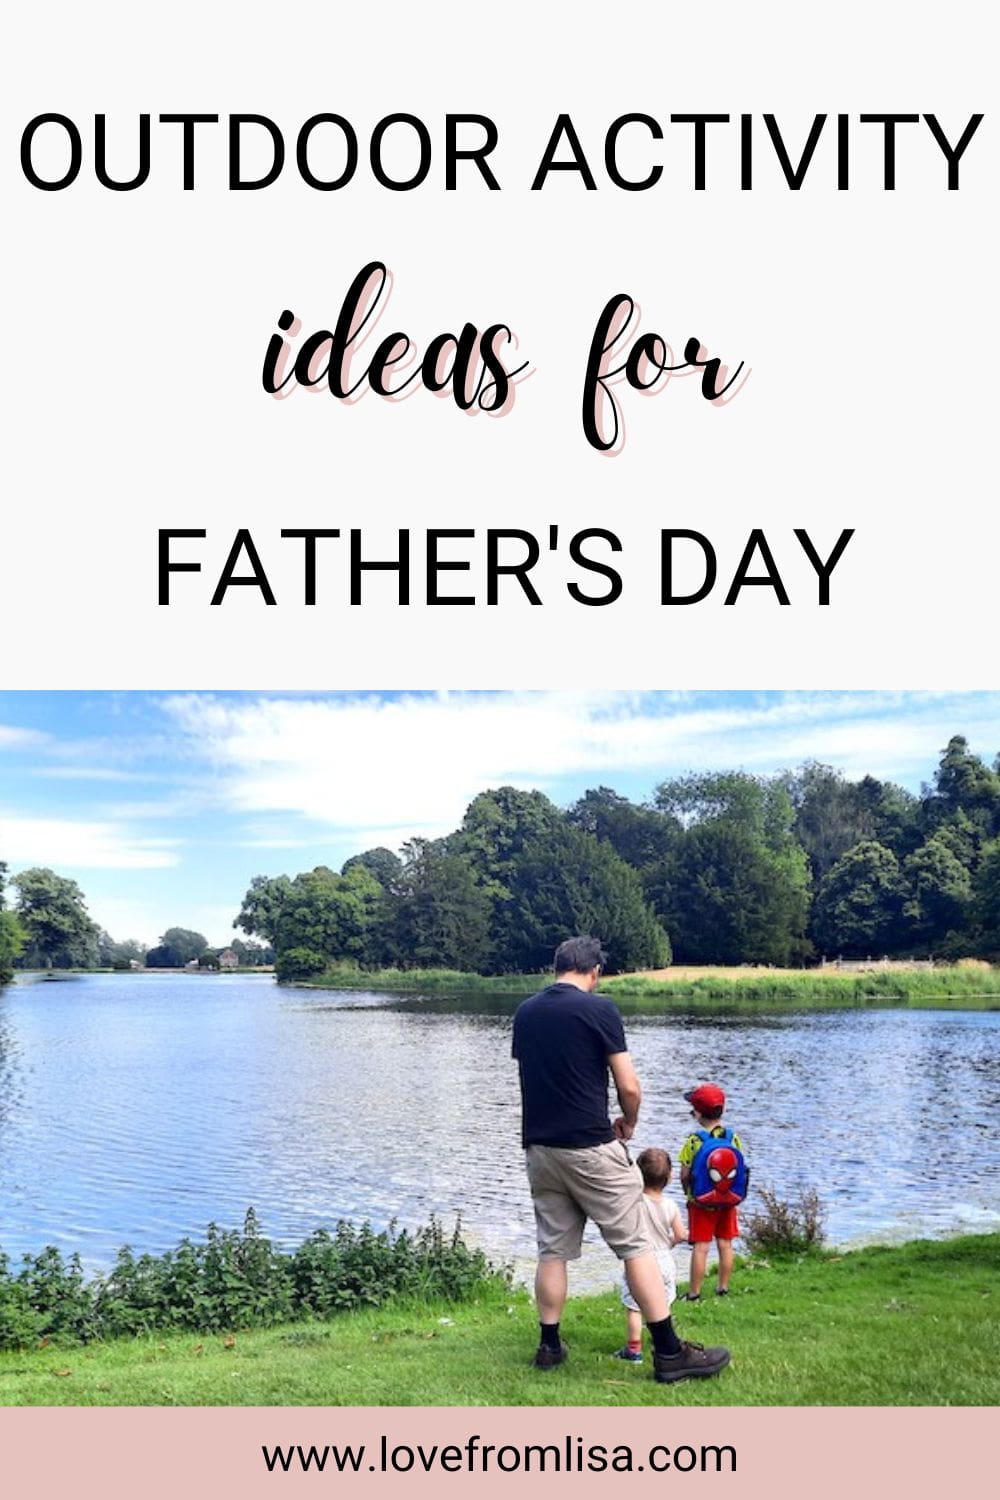 Outdoor activity ideas for Father’s Day